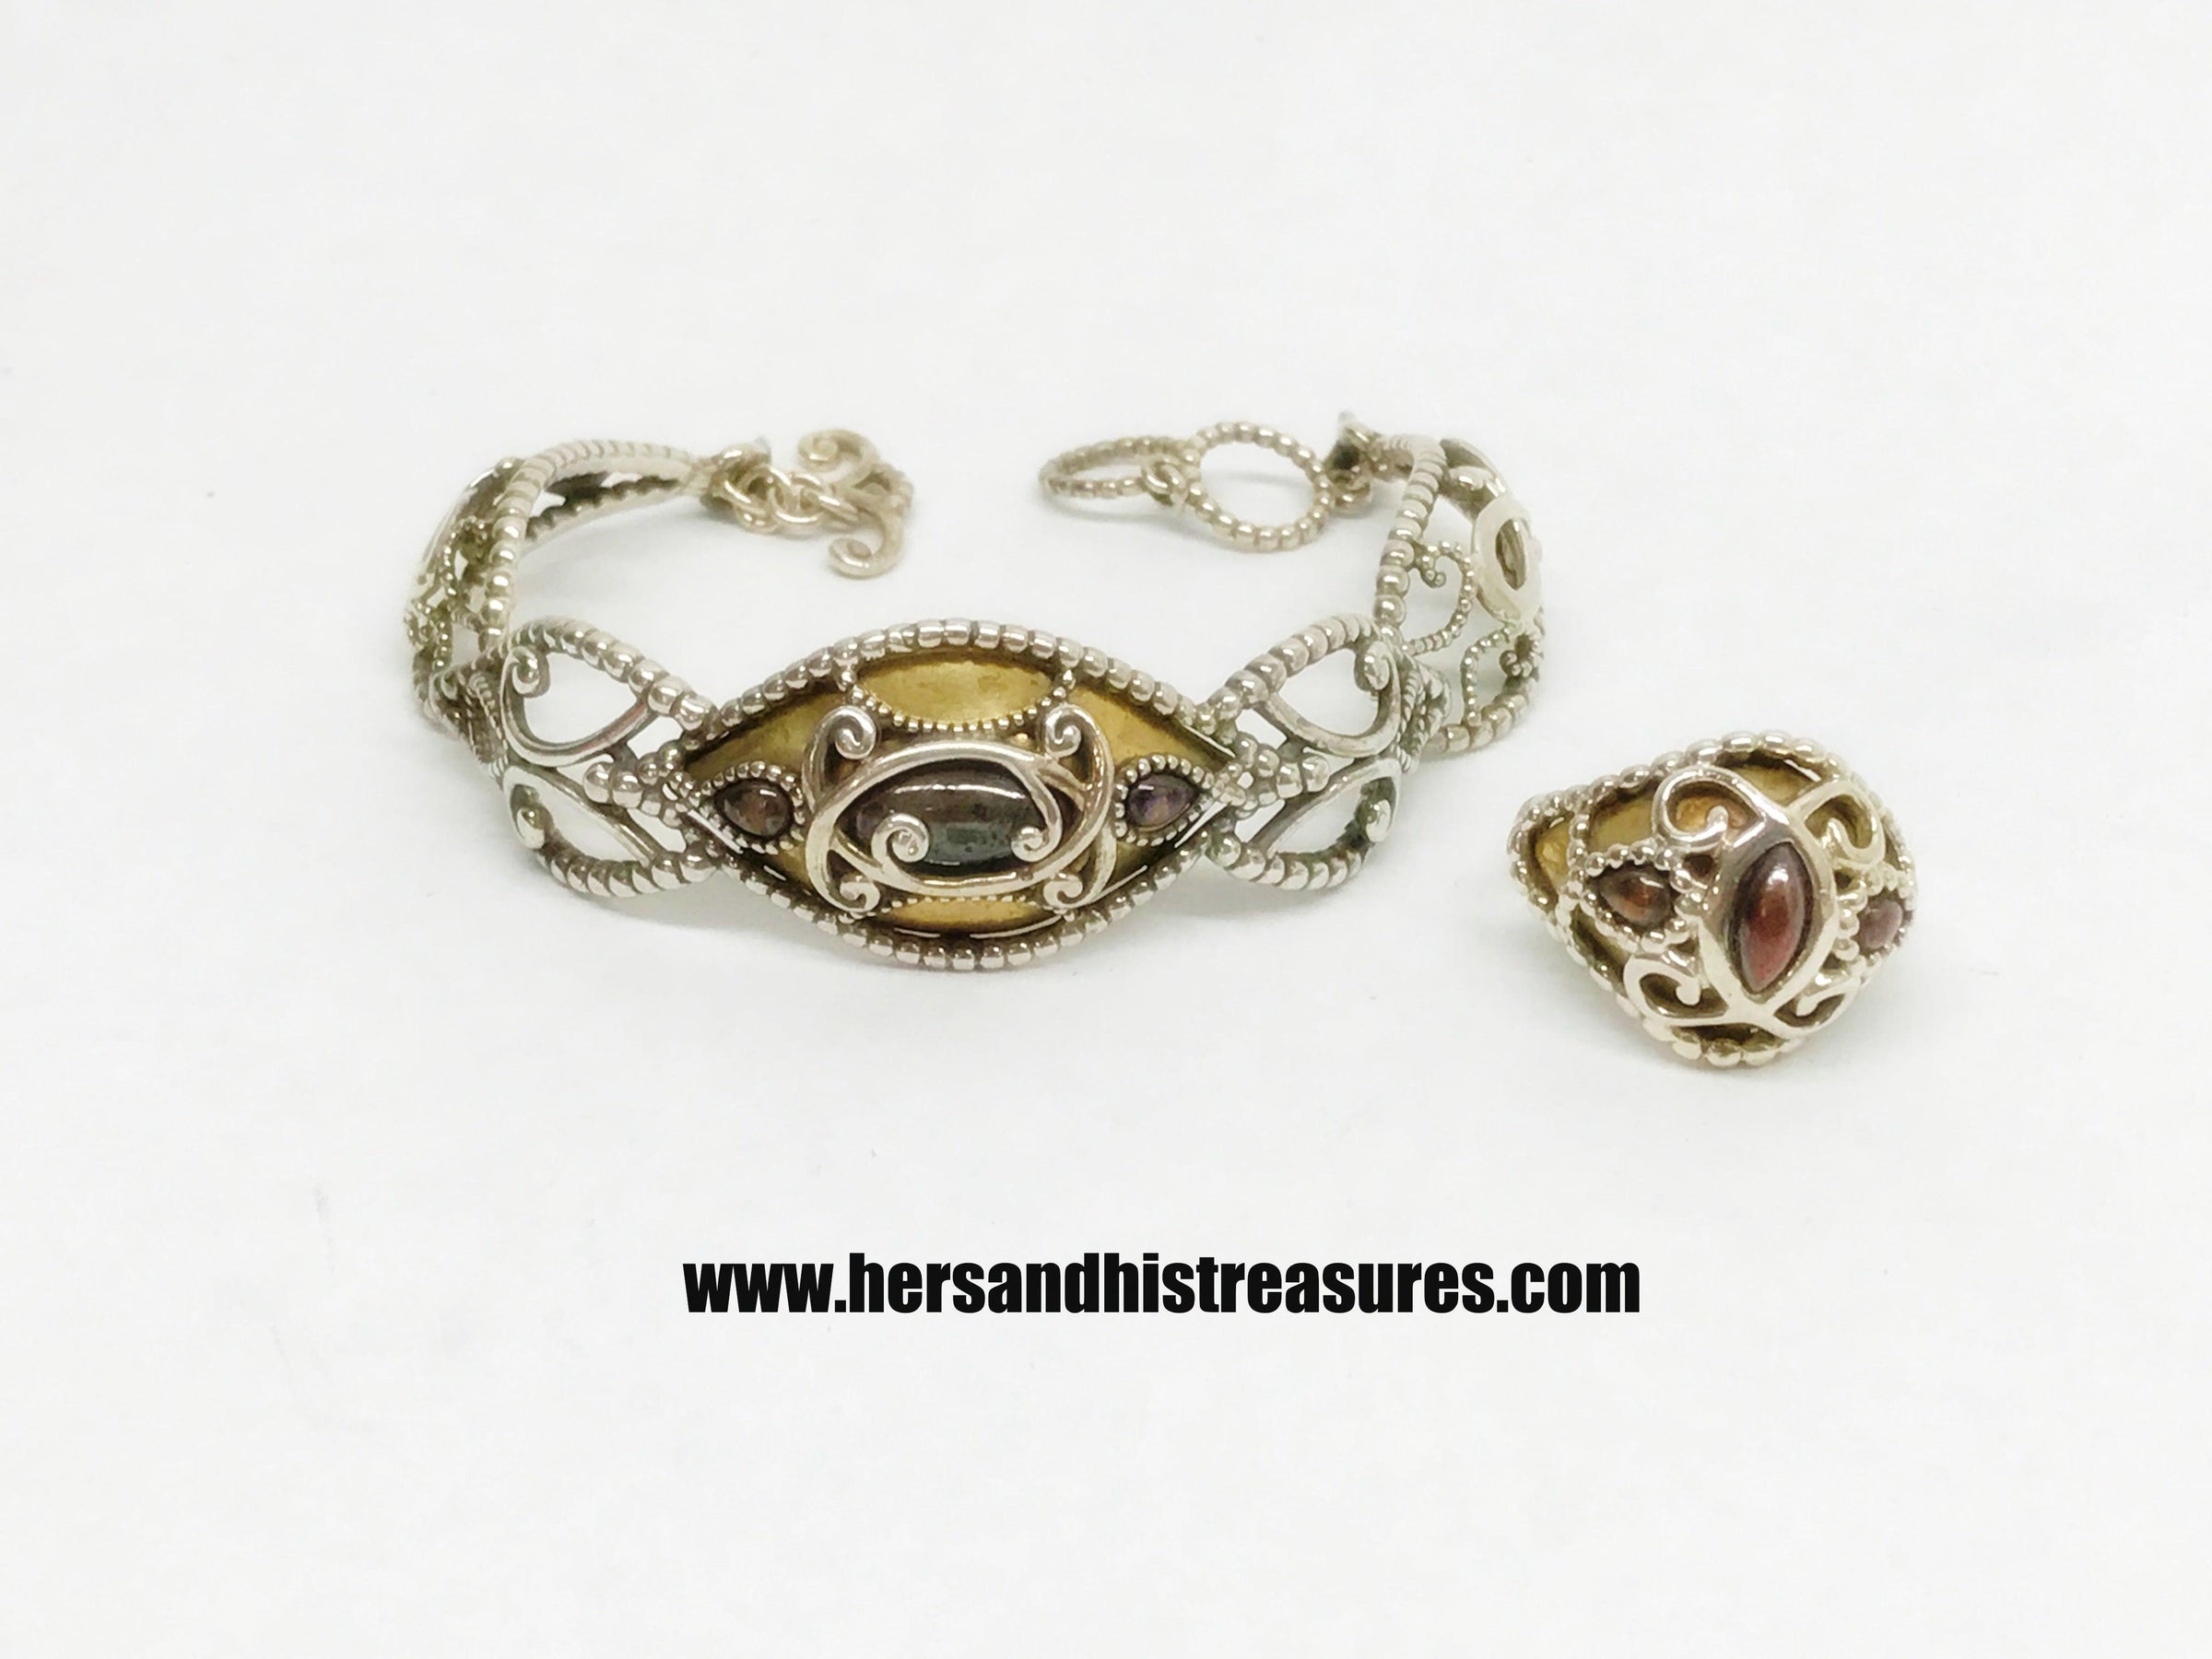 Relios Carolyn Pollack Sterling Silver/Brass/Copper Bracelet and Ring Set - Hers and His Treasures